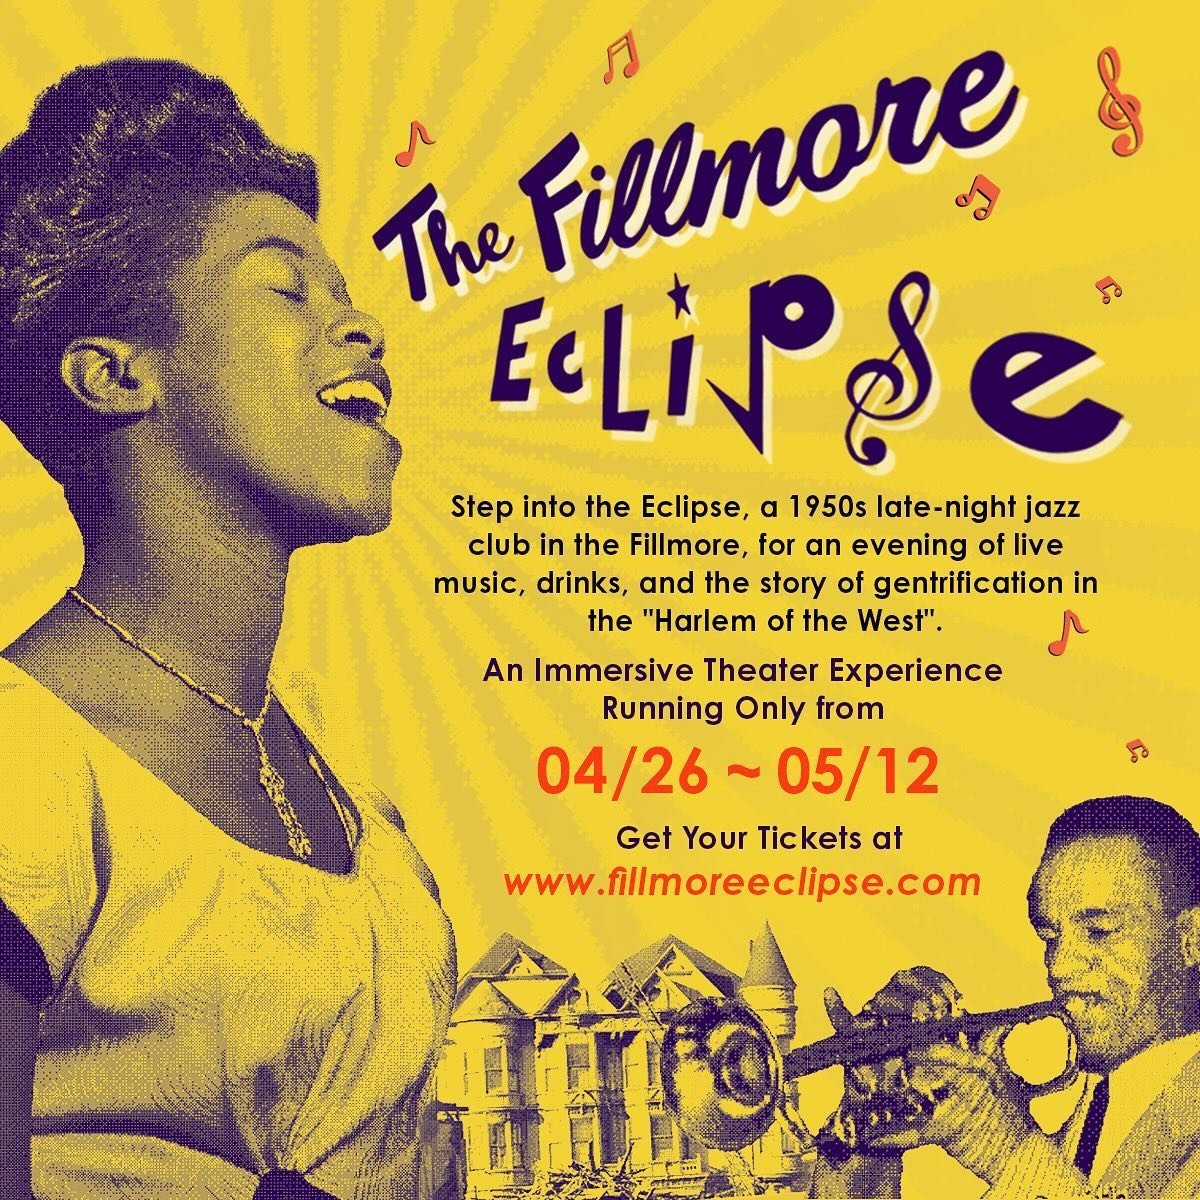 Z Space is pleased to recommend @thefillmoreeclipse 

THE FILLMORE ECLIPSE
April 26-May 12
Honey Art Studio

Step into the Fillmore Eclipse and enjoy the stylings of the house band, led by musical director Kelyn Crapp, and sip a cocktail or two from 